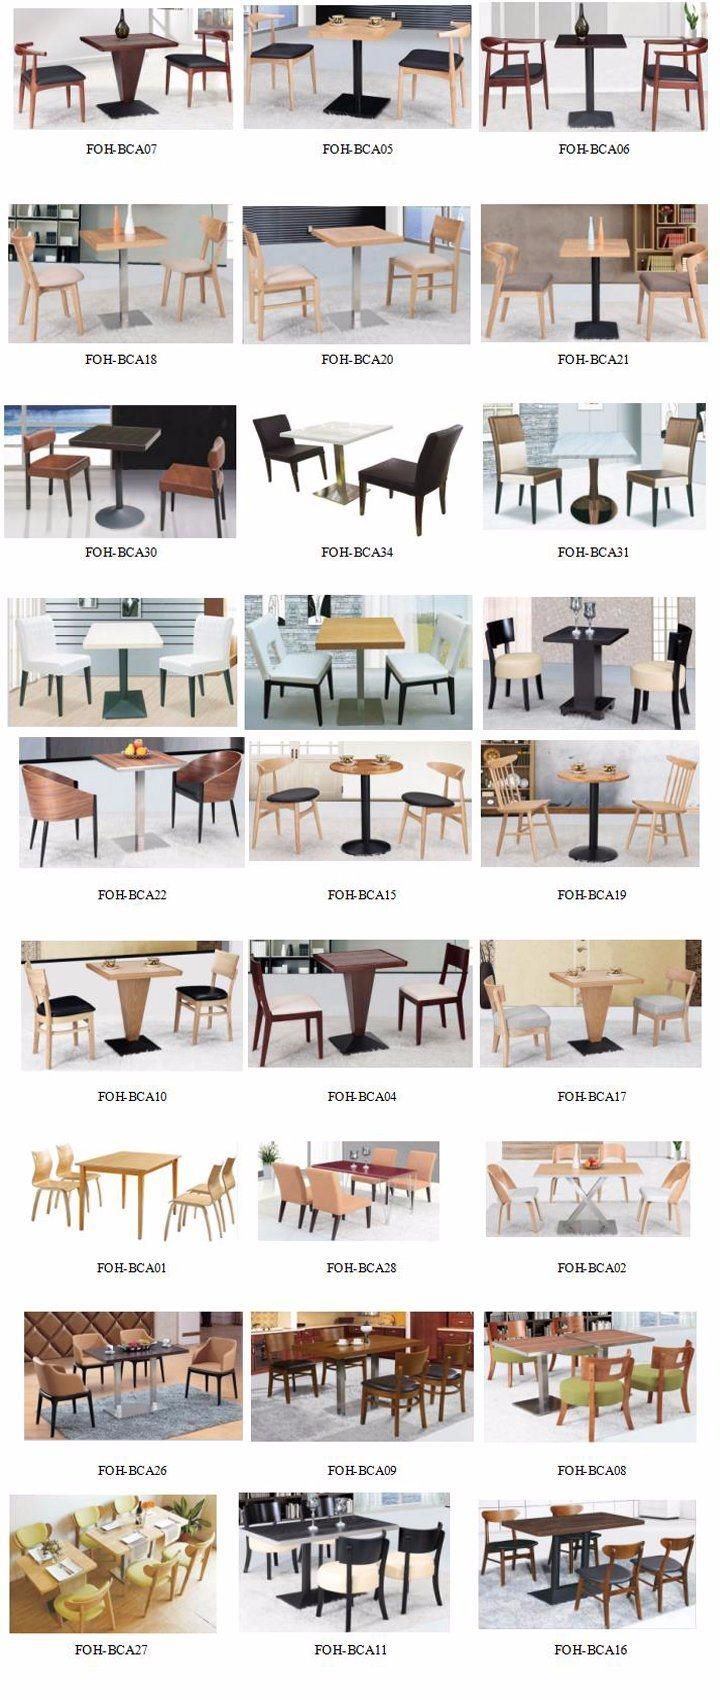 Chinese Manufacturer of Wooden Dining Furniture Table Chair Set